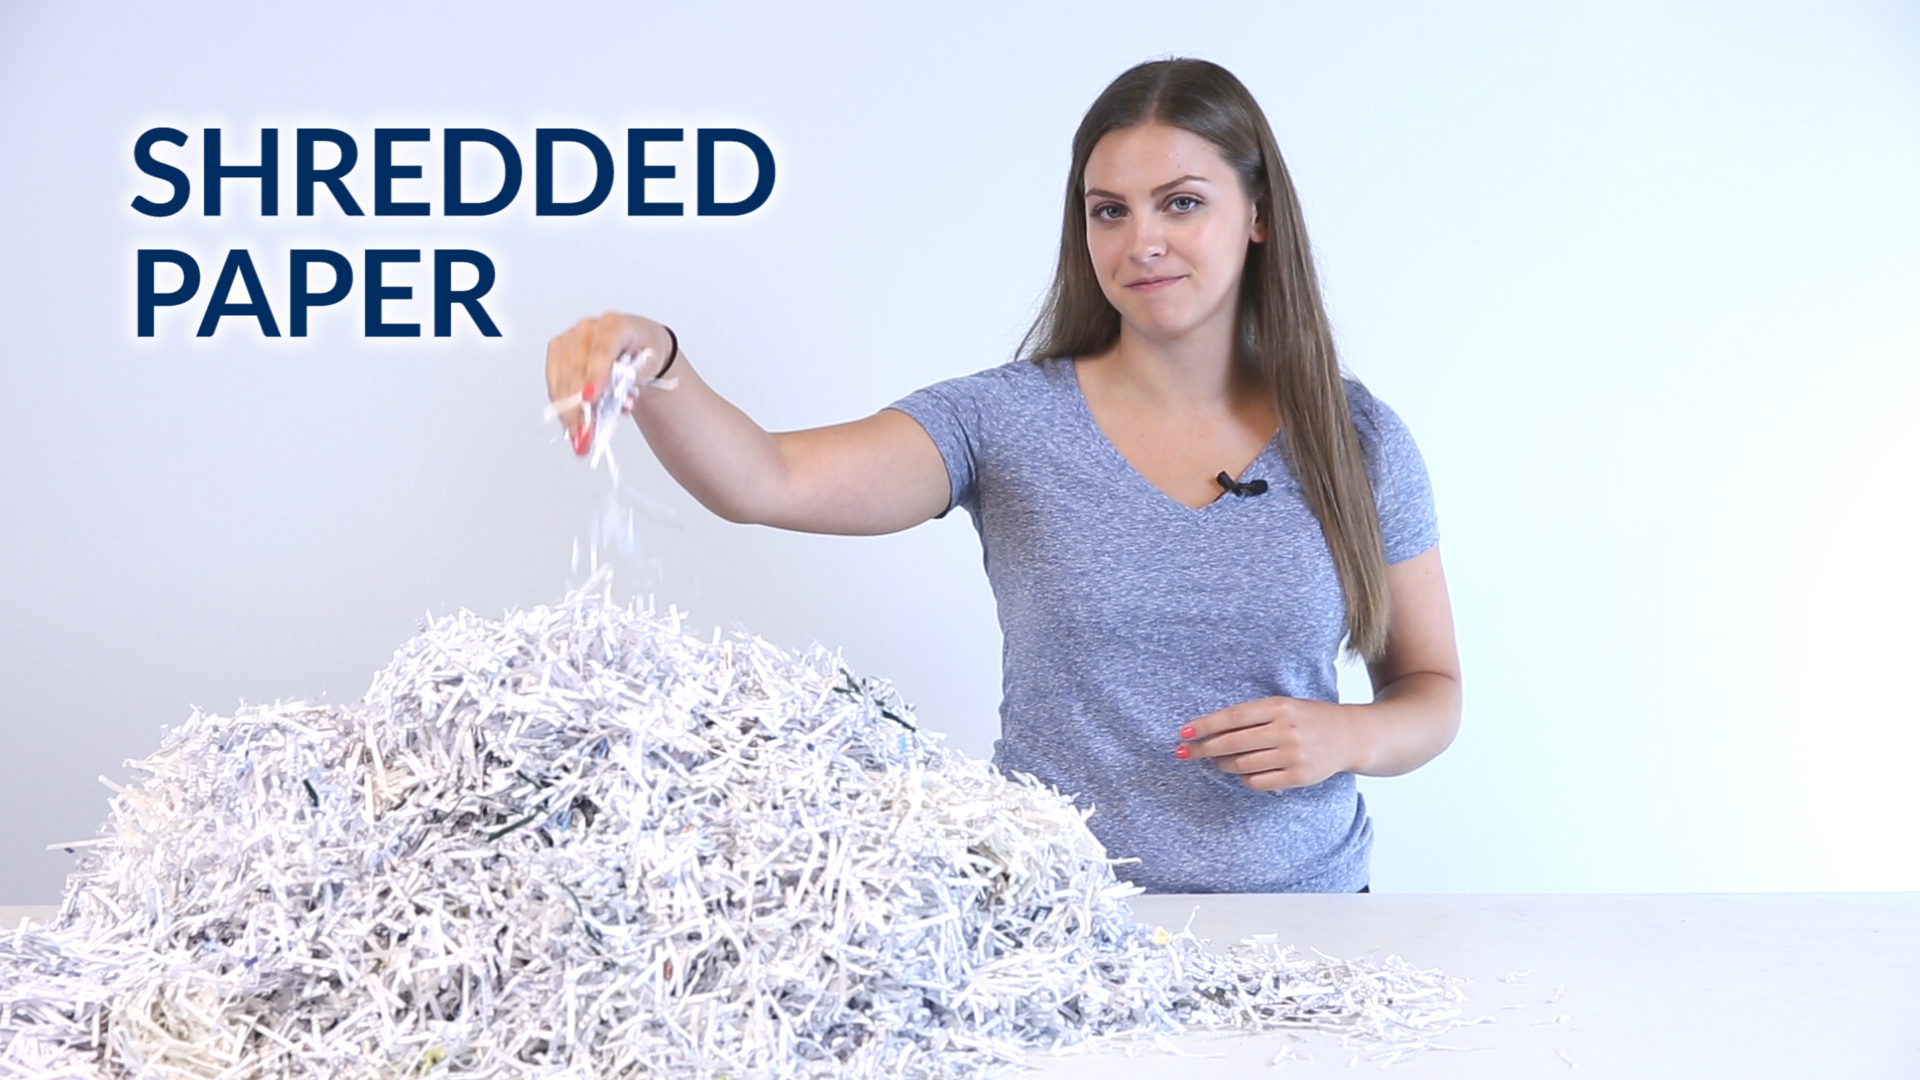 Four Fun Uses for Shredded Paper